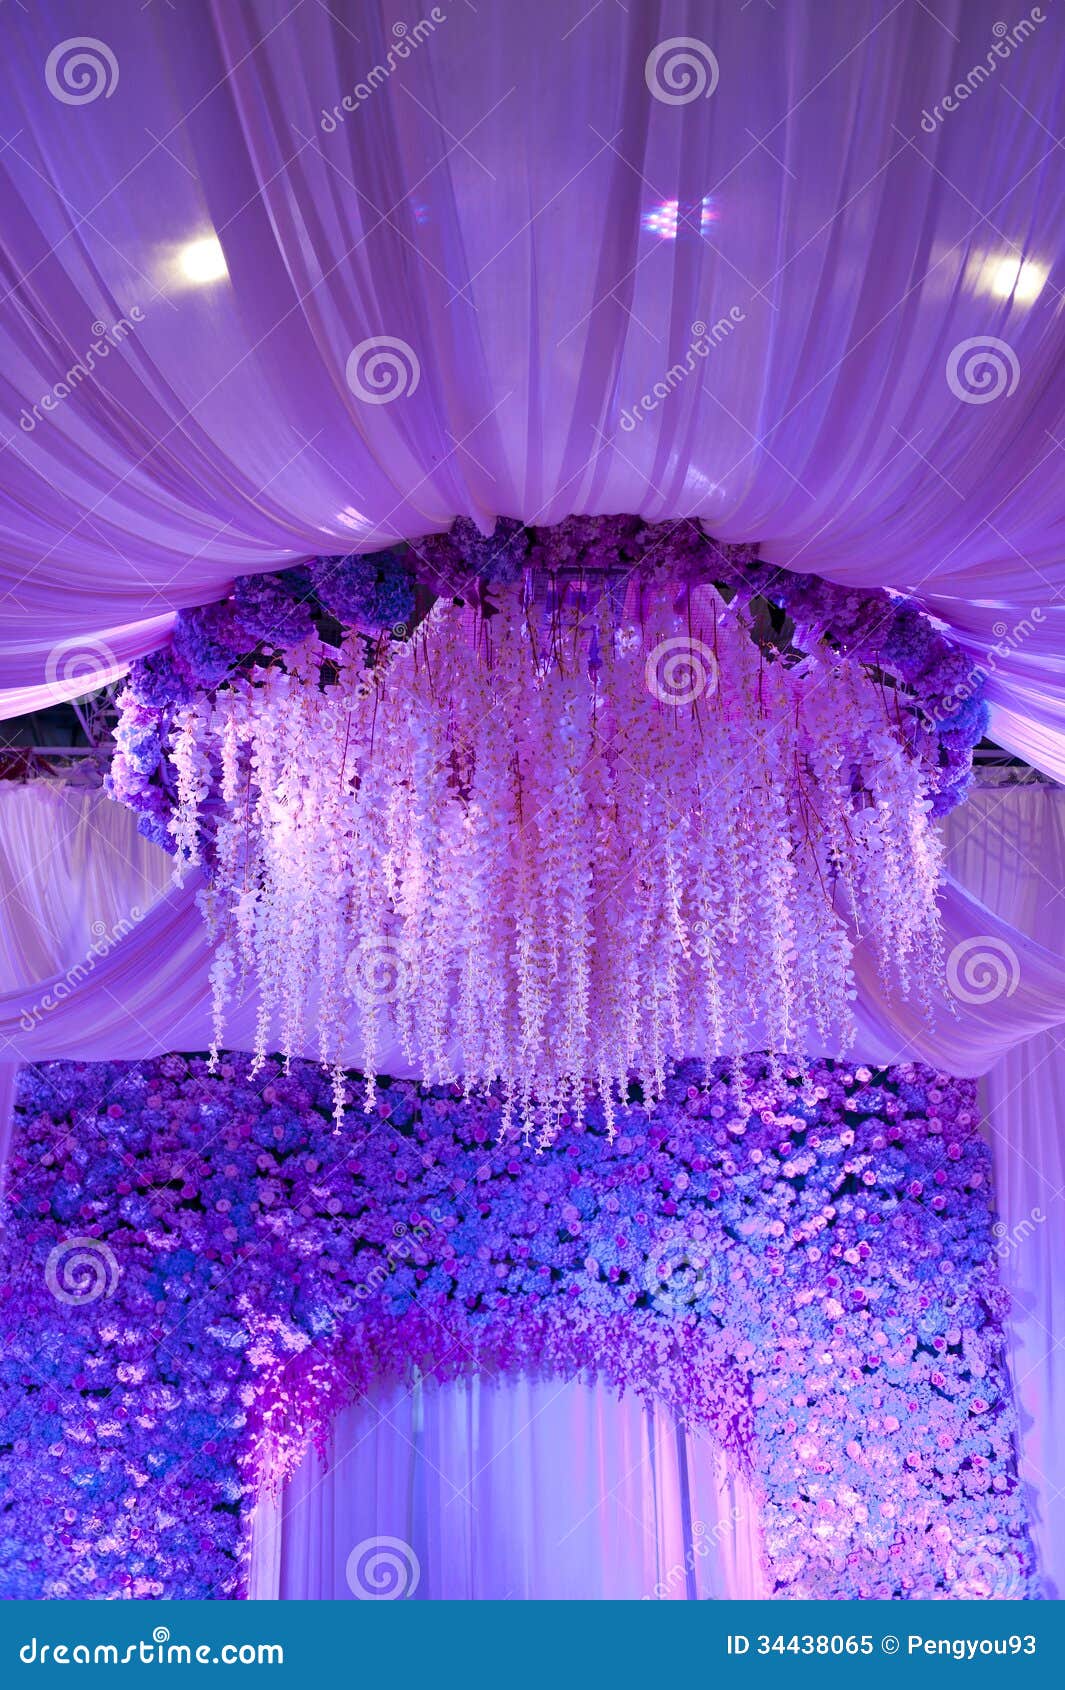 Wedding Background Decorations Cheapest Prices, Save 63% 